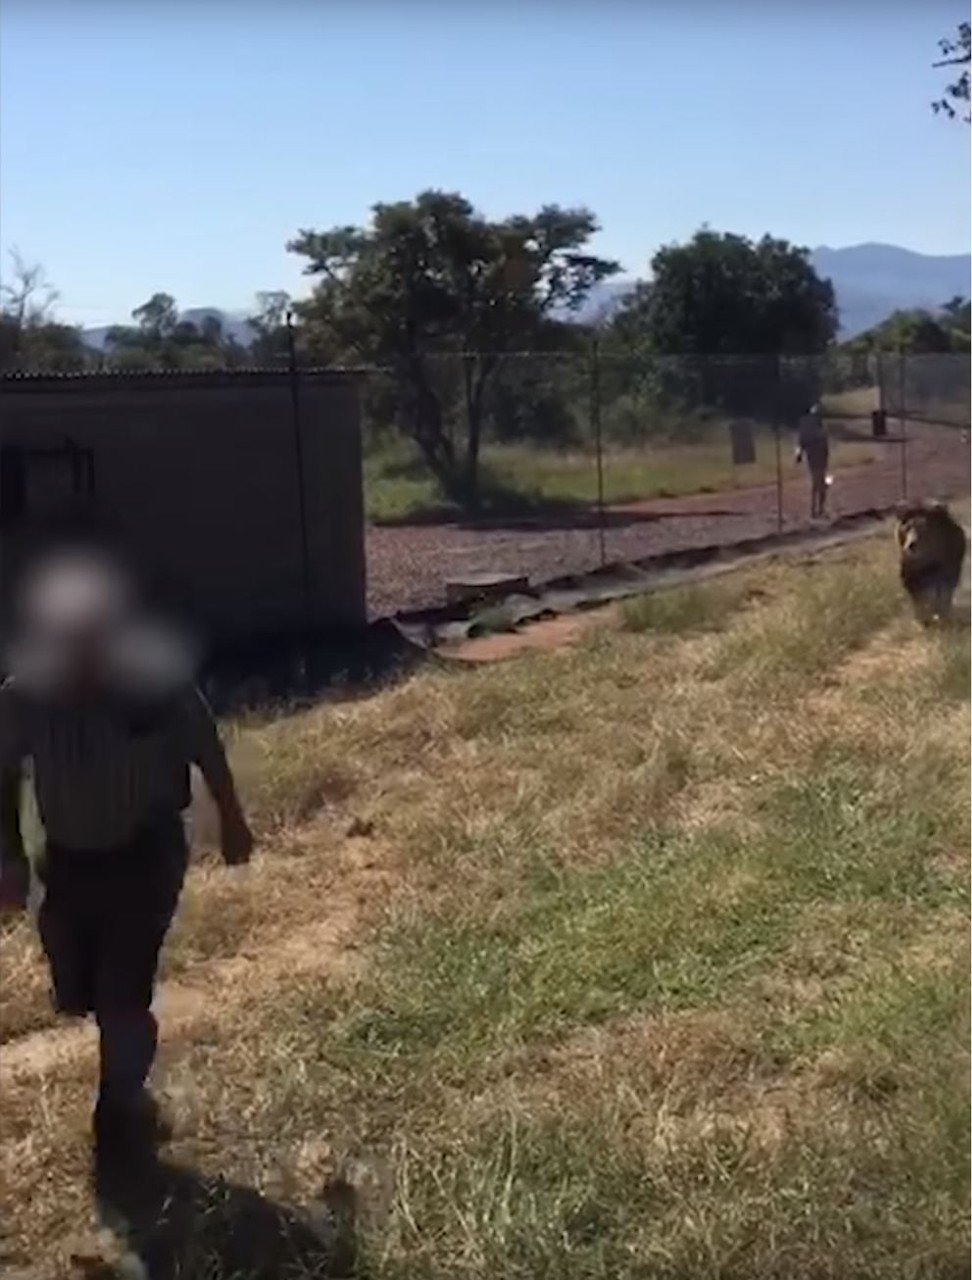 This was the moment that the man turned to flee, having realised that the lion was racing for him. Photo: News24